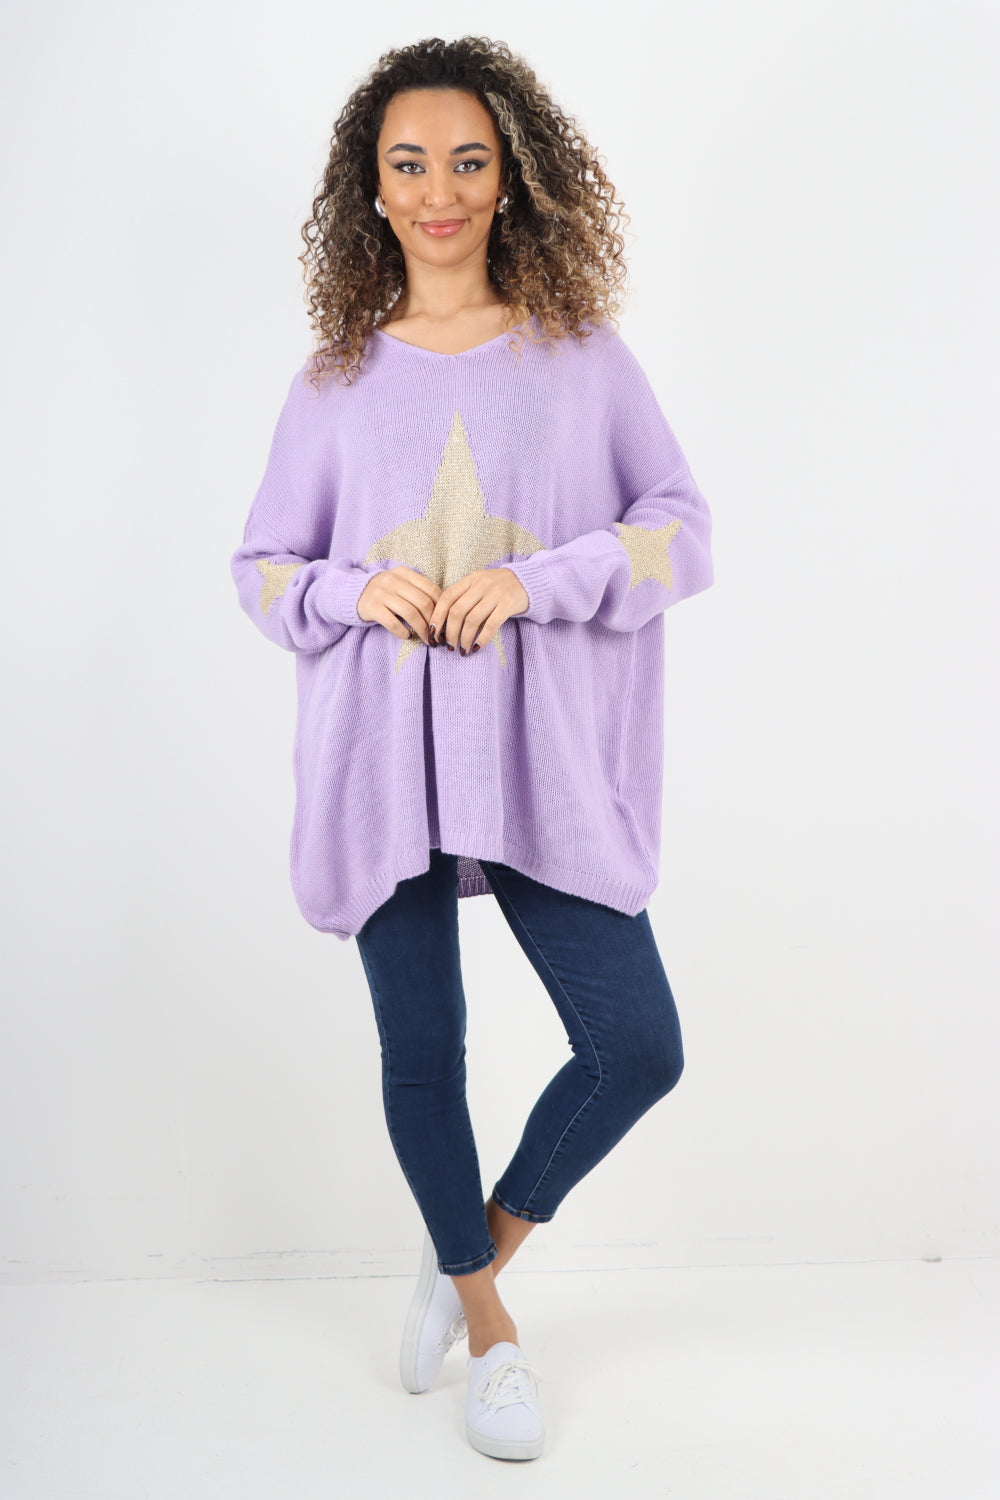 Oversized Sparkle Star Print Sleeve Knitted Jumper Top